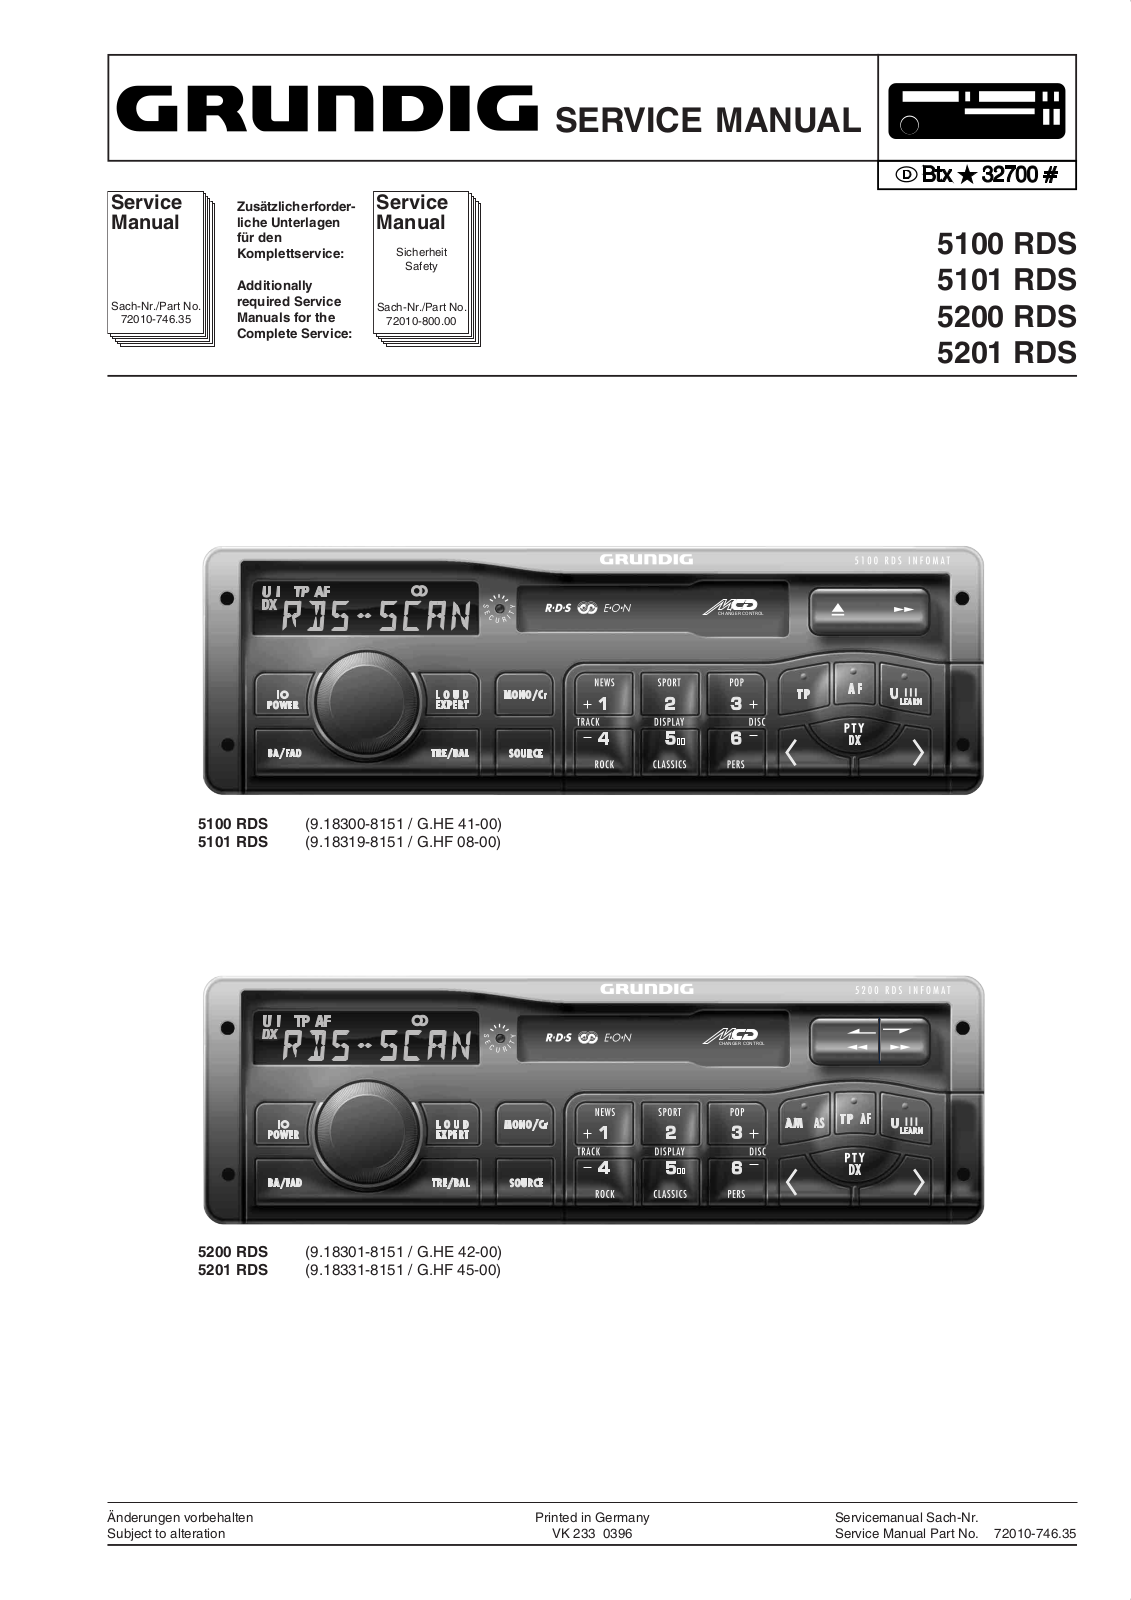 Grundig 5201-RDS, 5200-RDS, 5100-RDS, 5101-RDS Service Manual